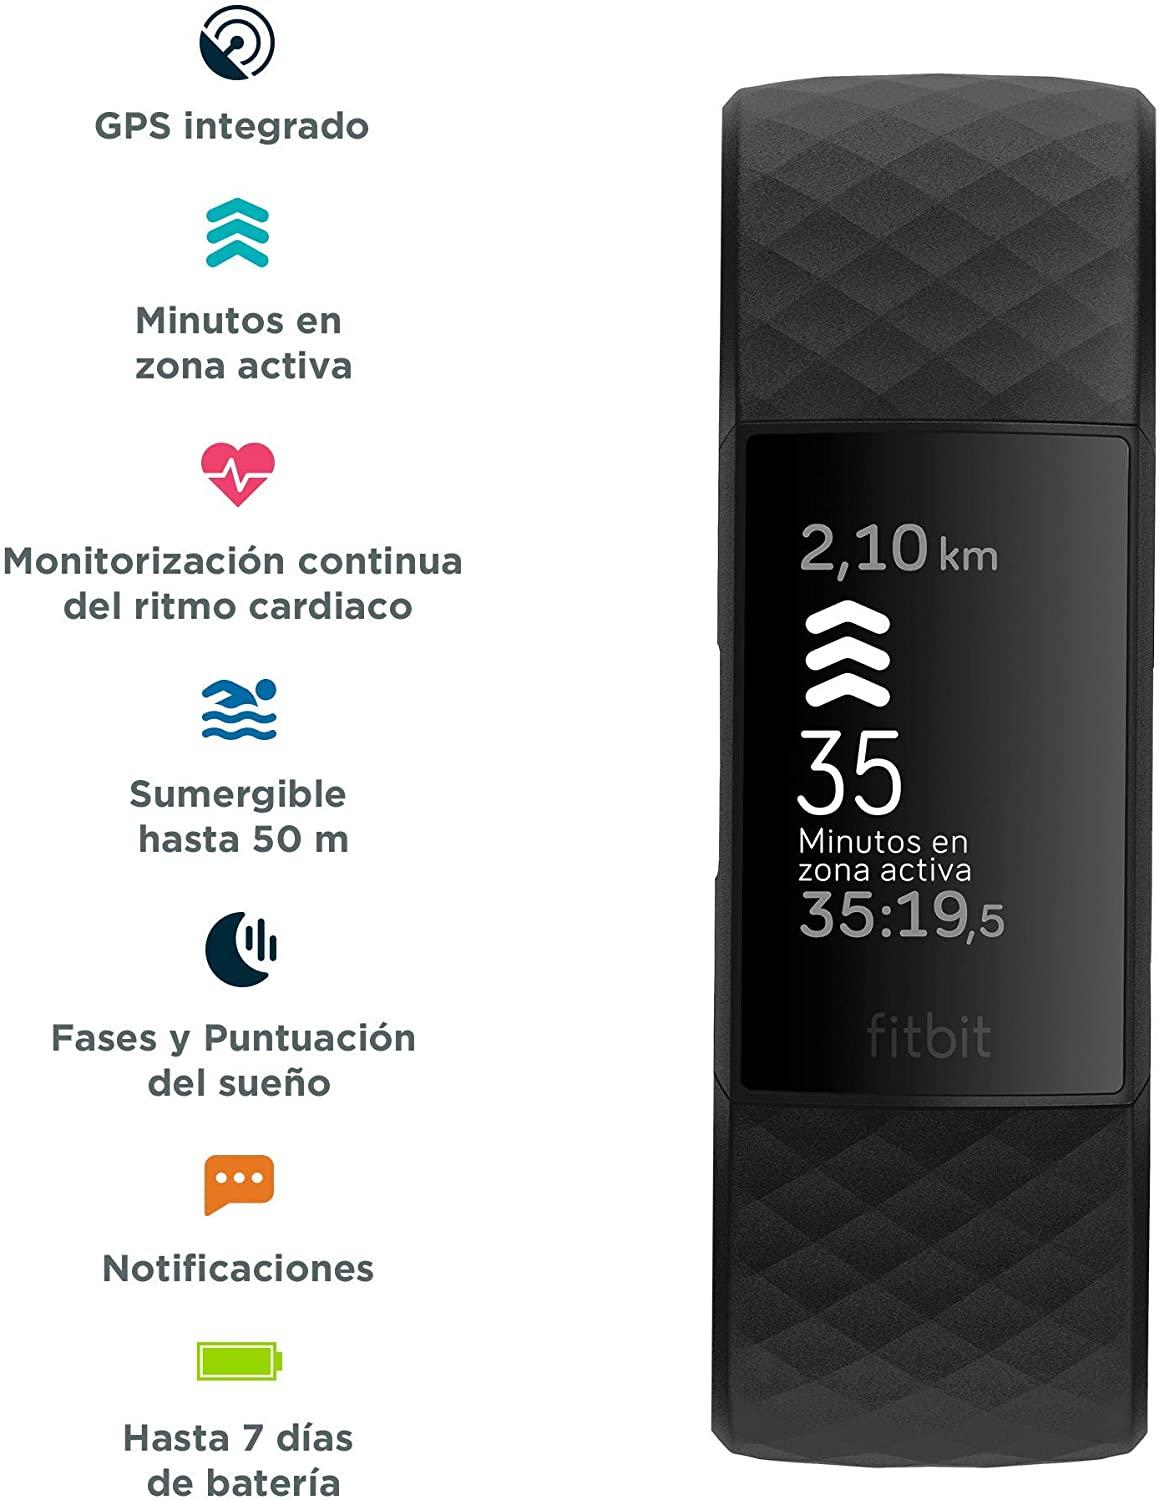 smartband Fitbit Charge 4